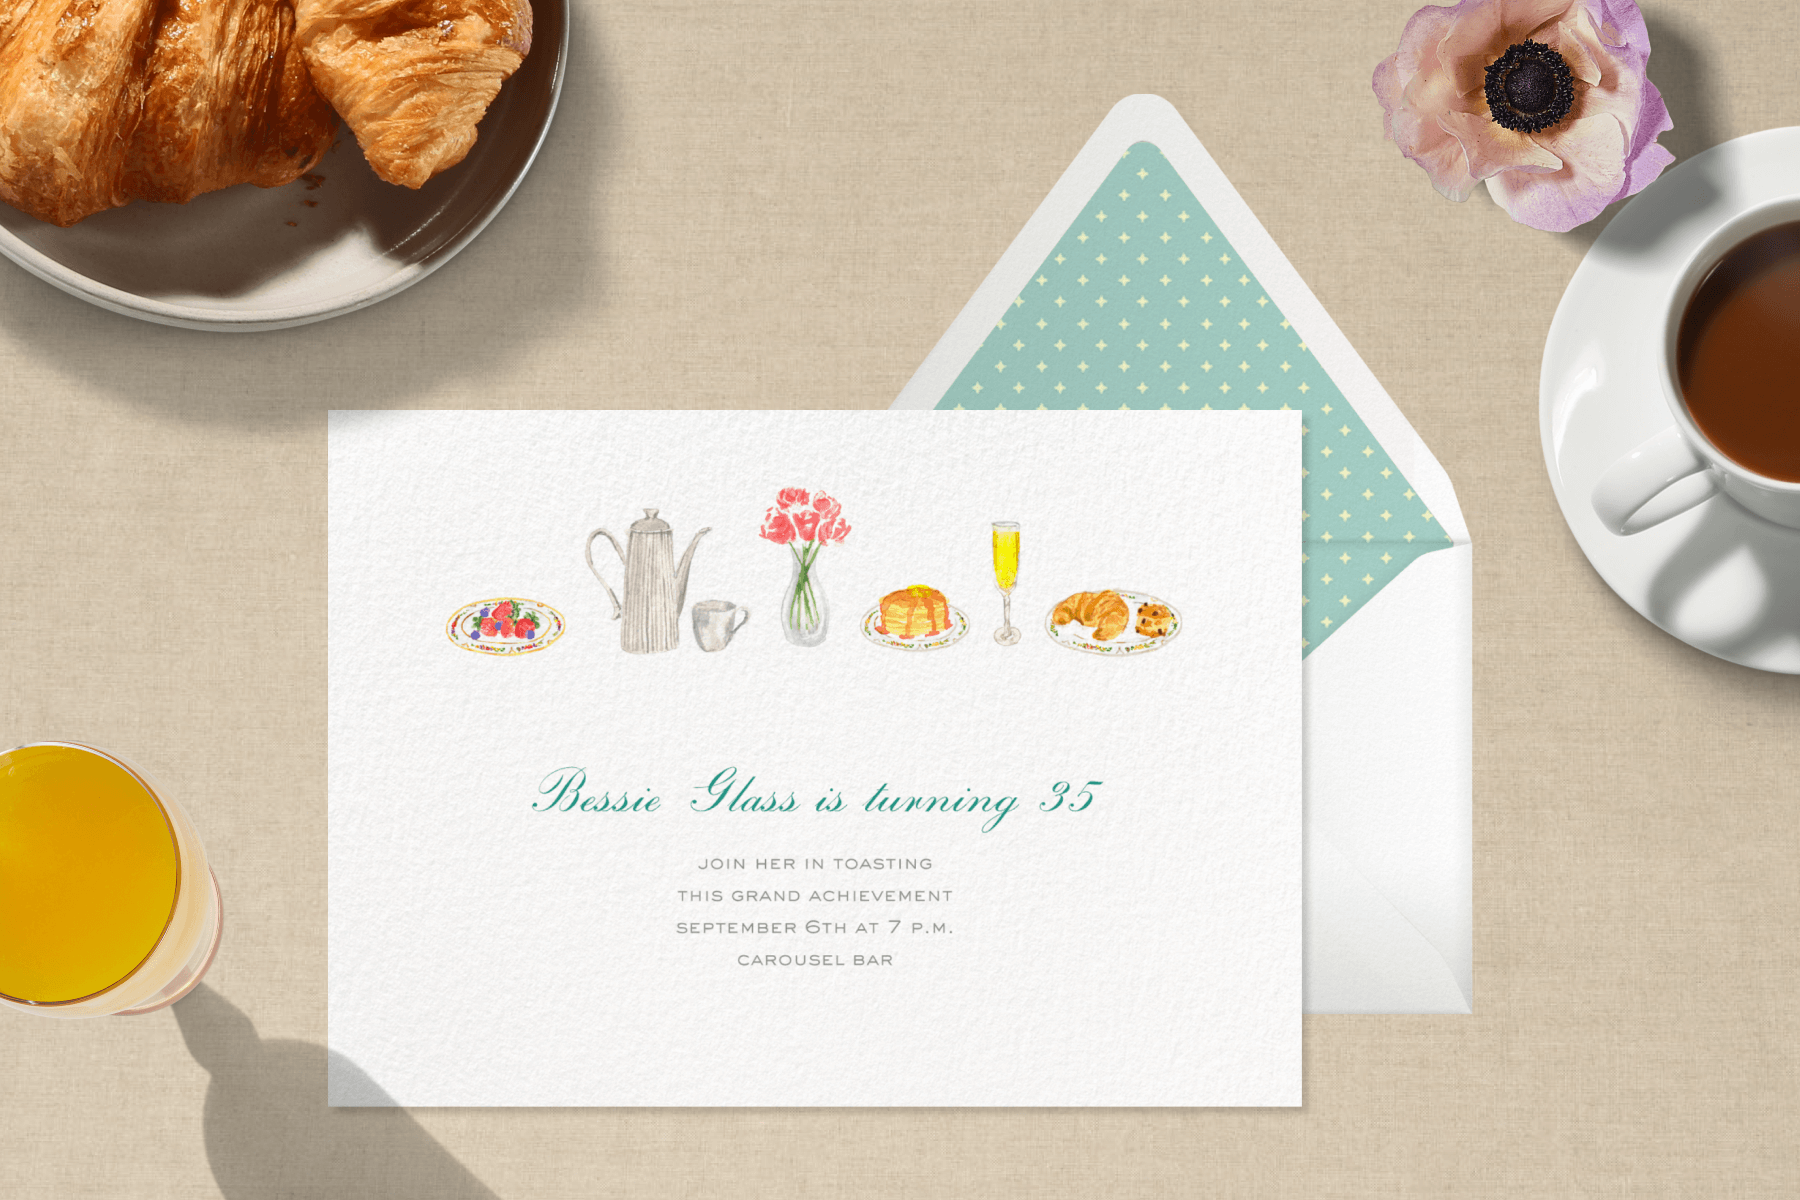 An invitation for a 35th birthday has small watercolors of brunch items at the top such as pancakes, strawberries, flowers, and croissants. In the background is orange juice, croissants, and a cup of coffee.